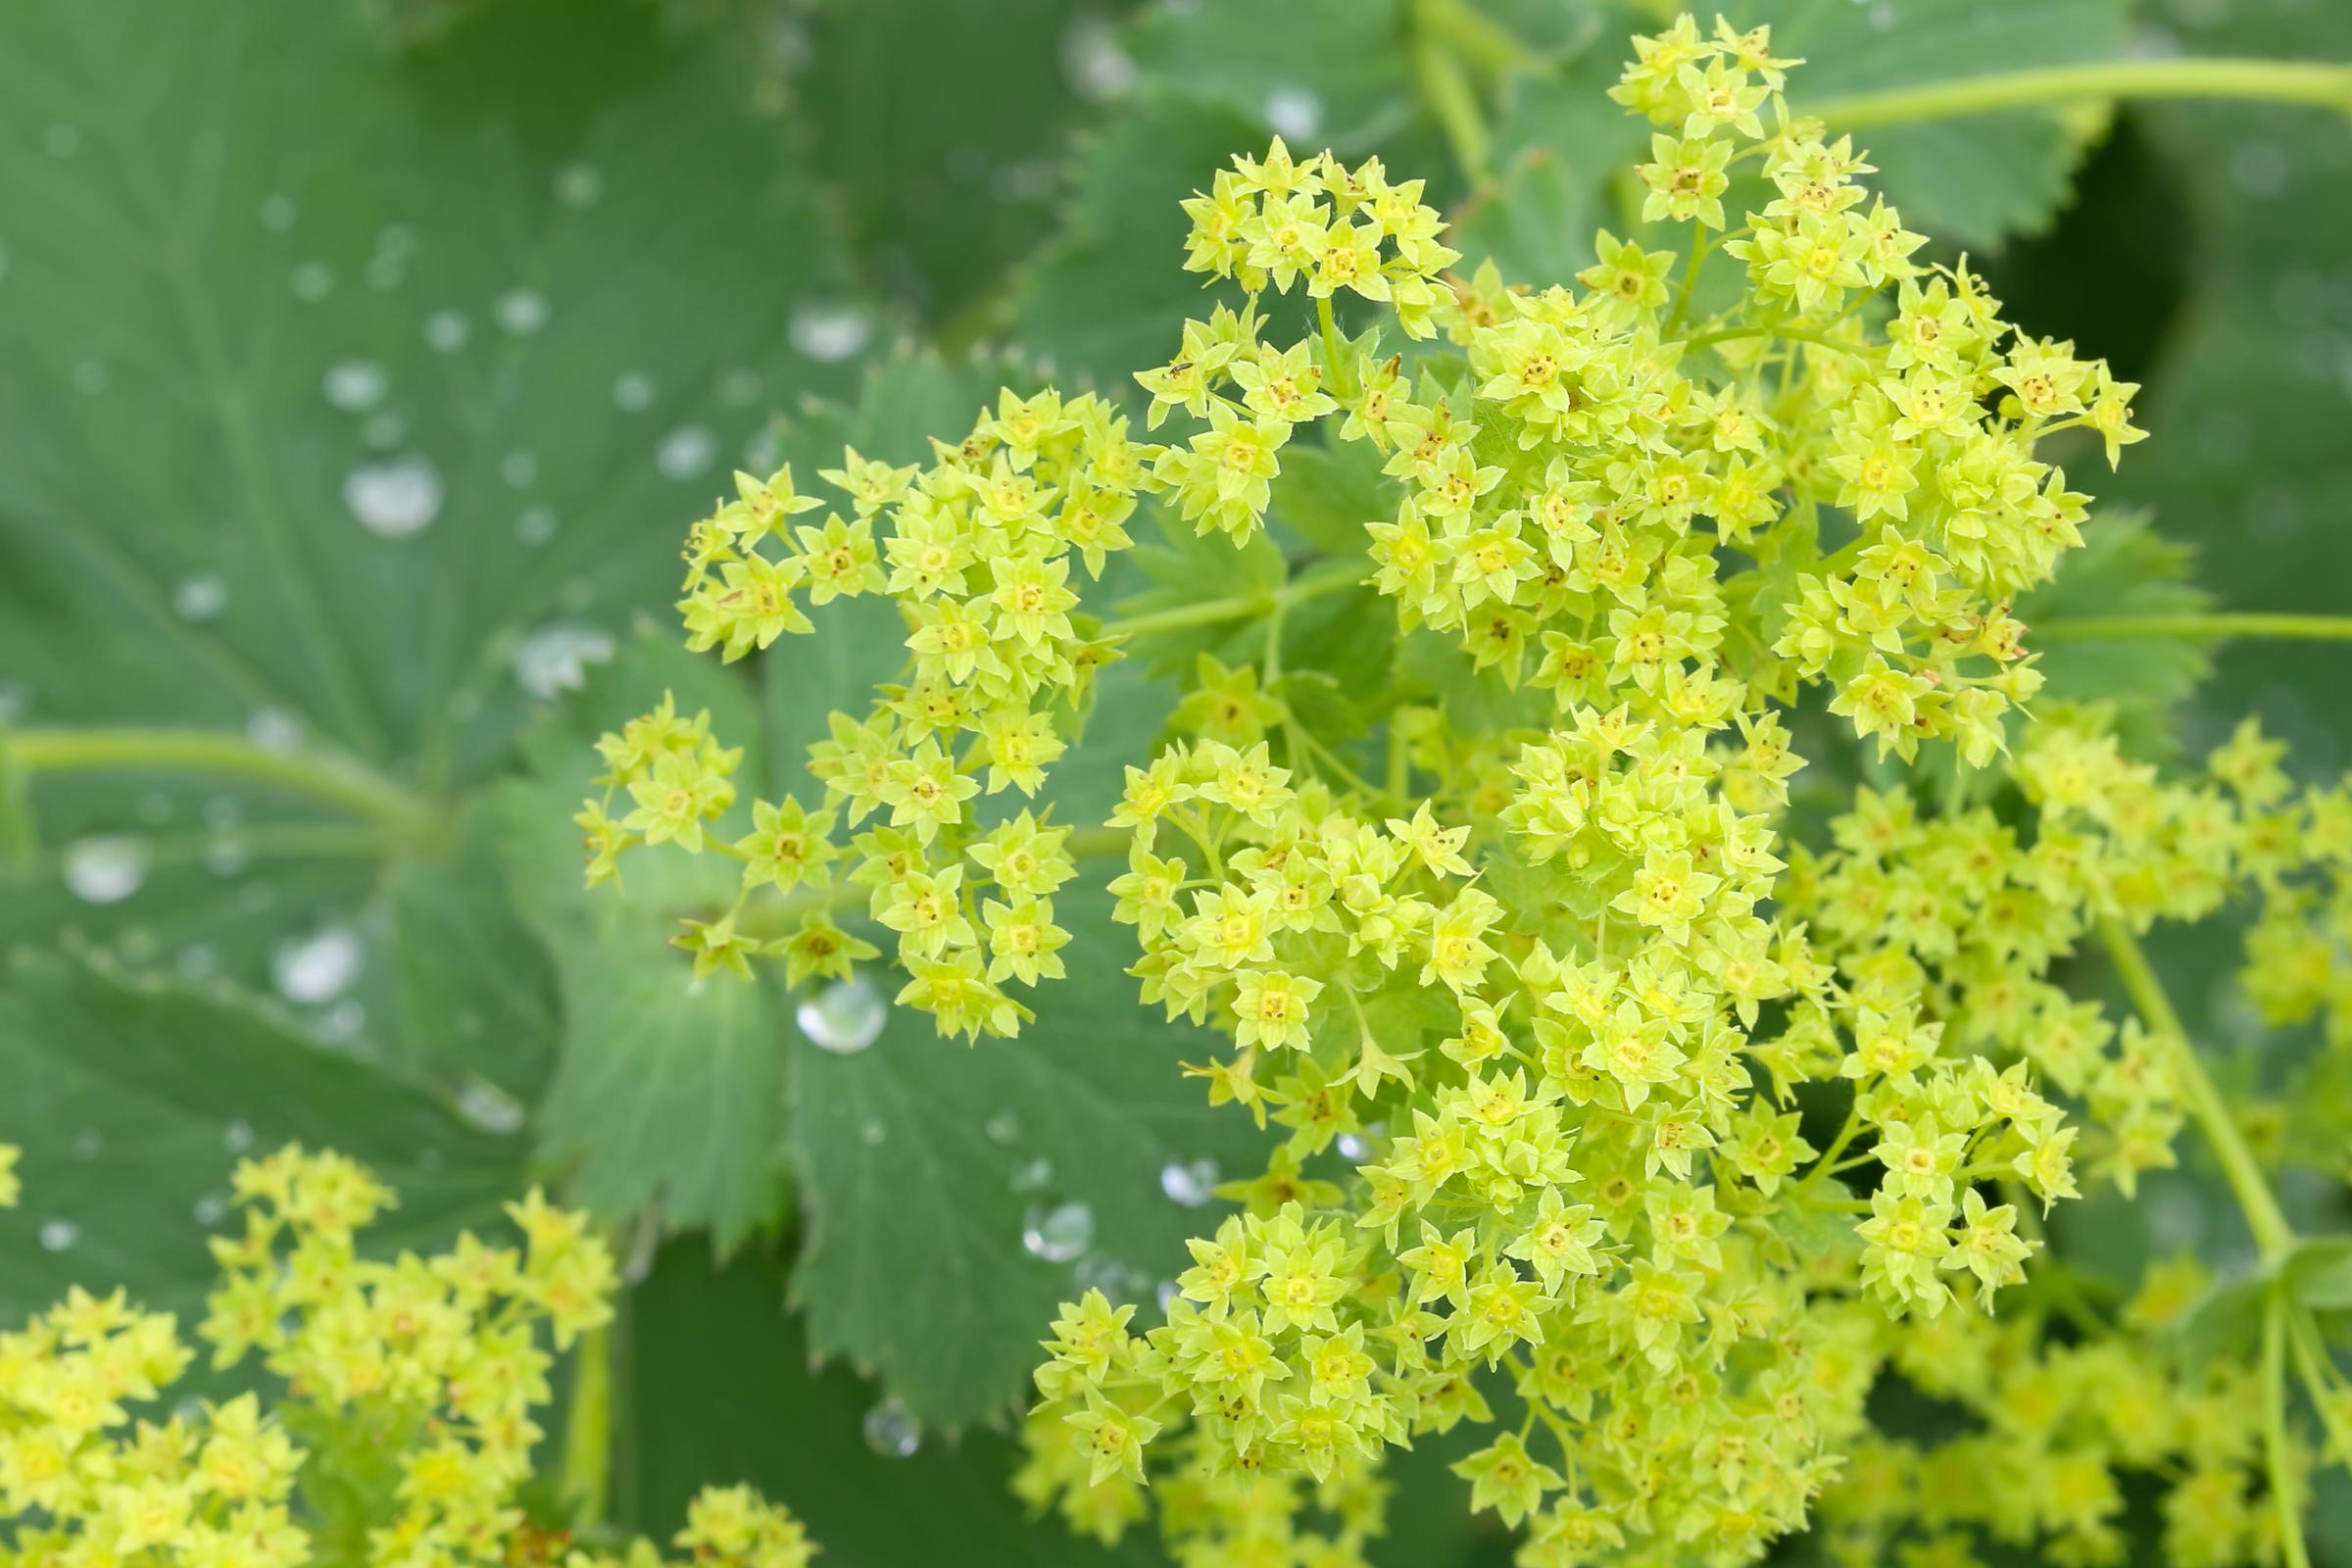 Closeup of Common Lady s Mantle flowers ( Alchemilla mollis) with morning dews on leaves.